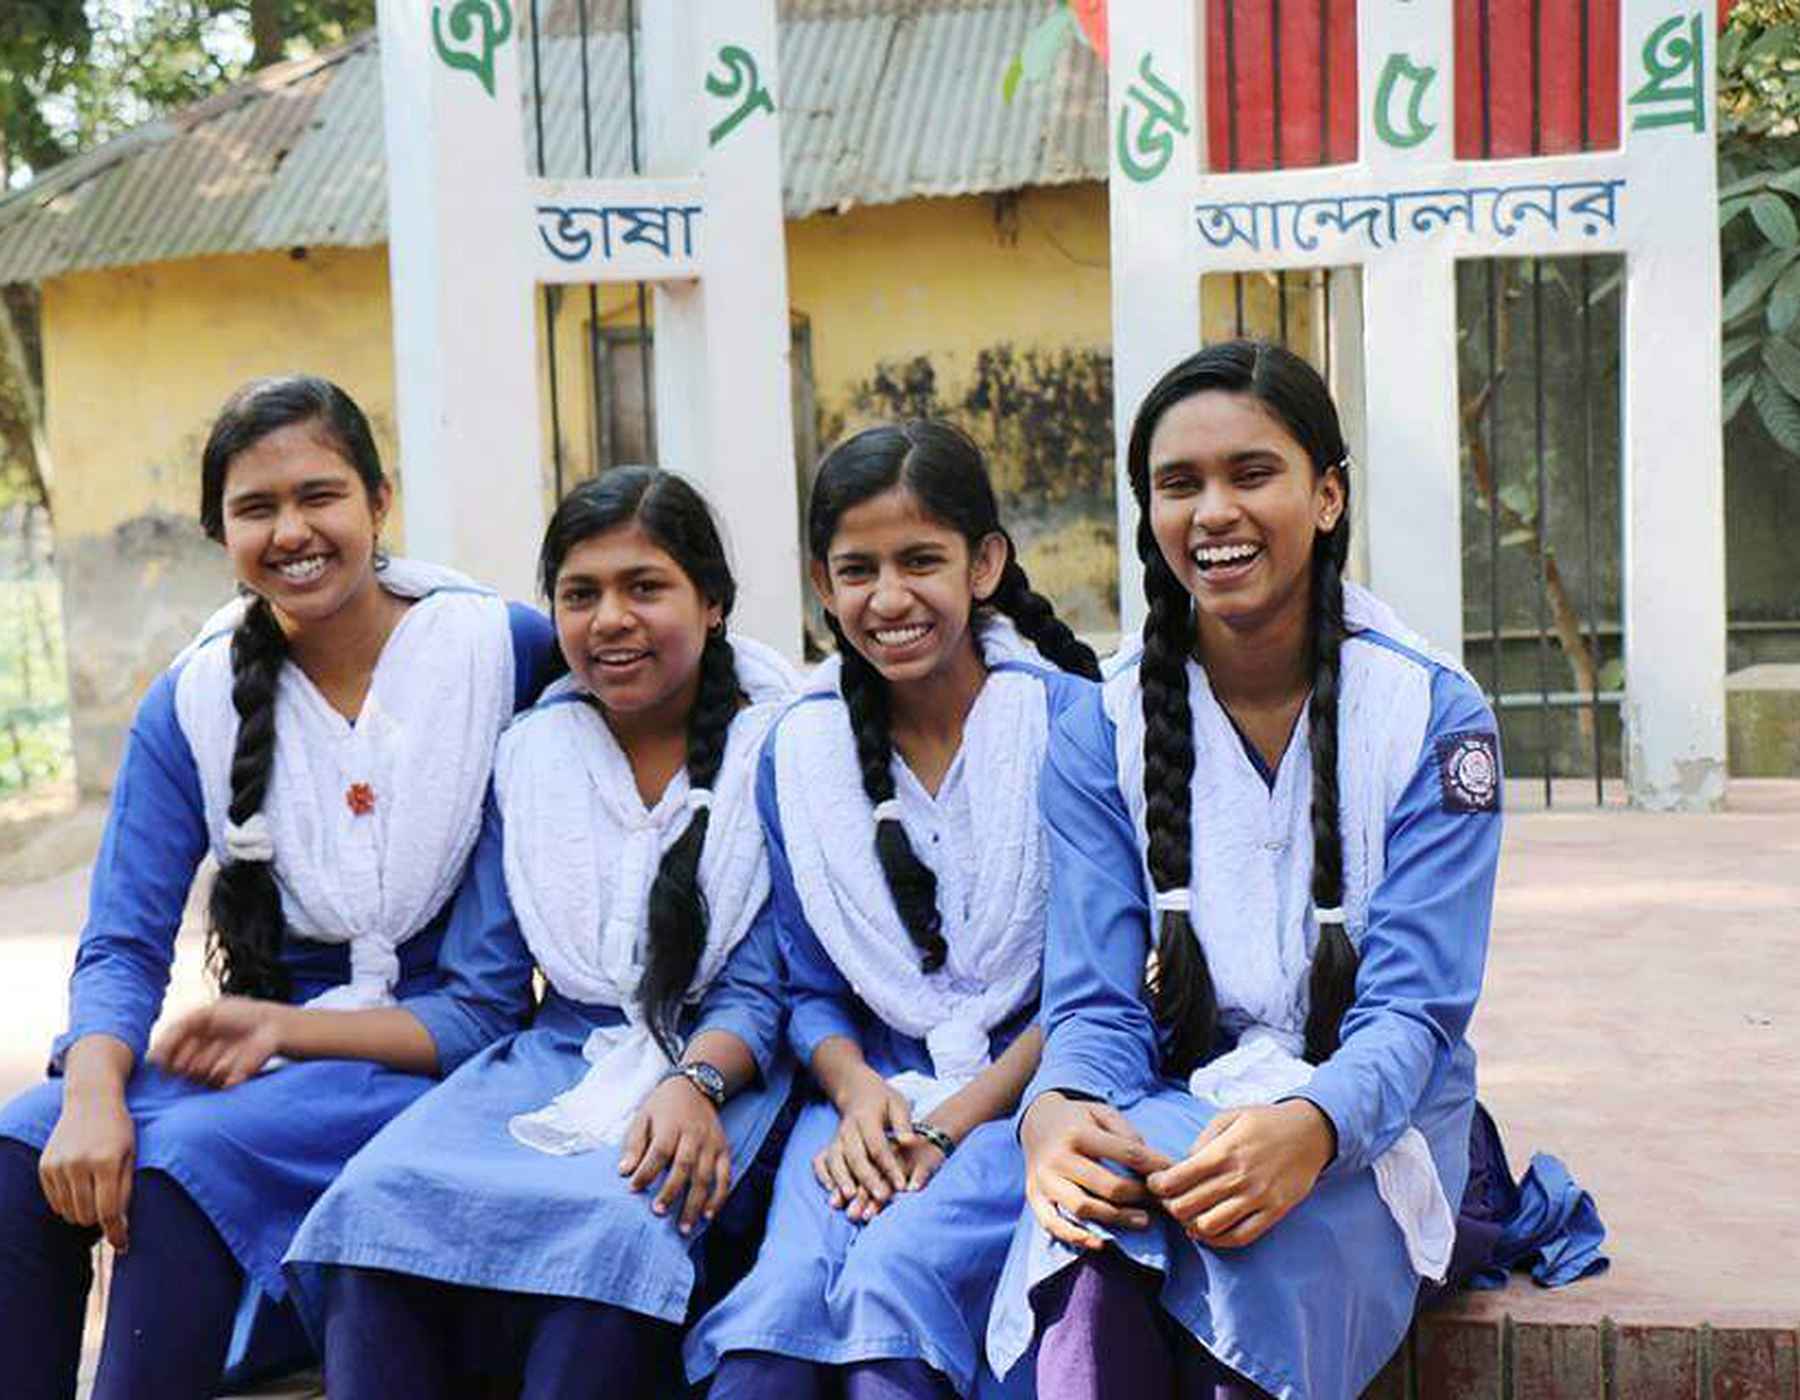 Four young women in Bangladesh are laughing while wearing a blue uniform and white scarves.